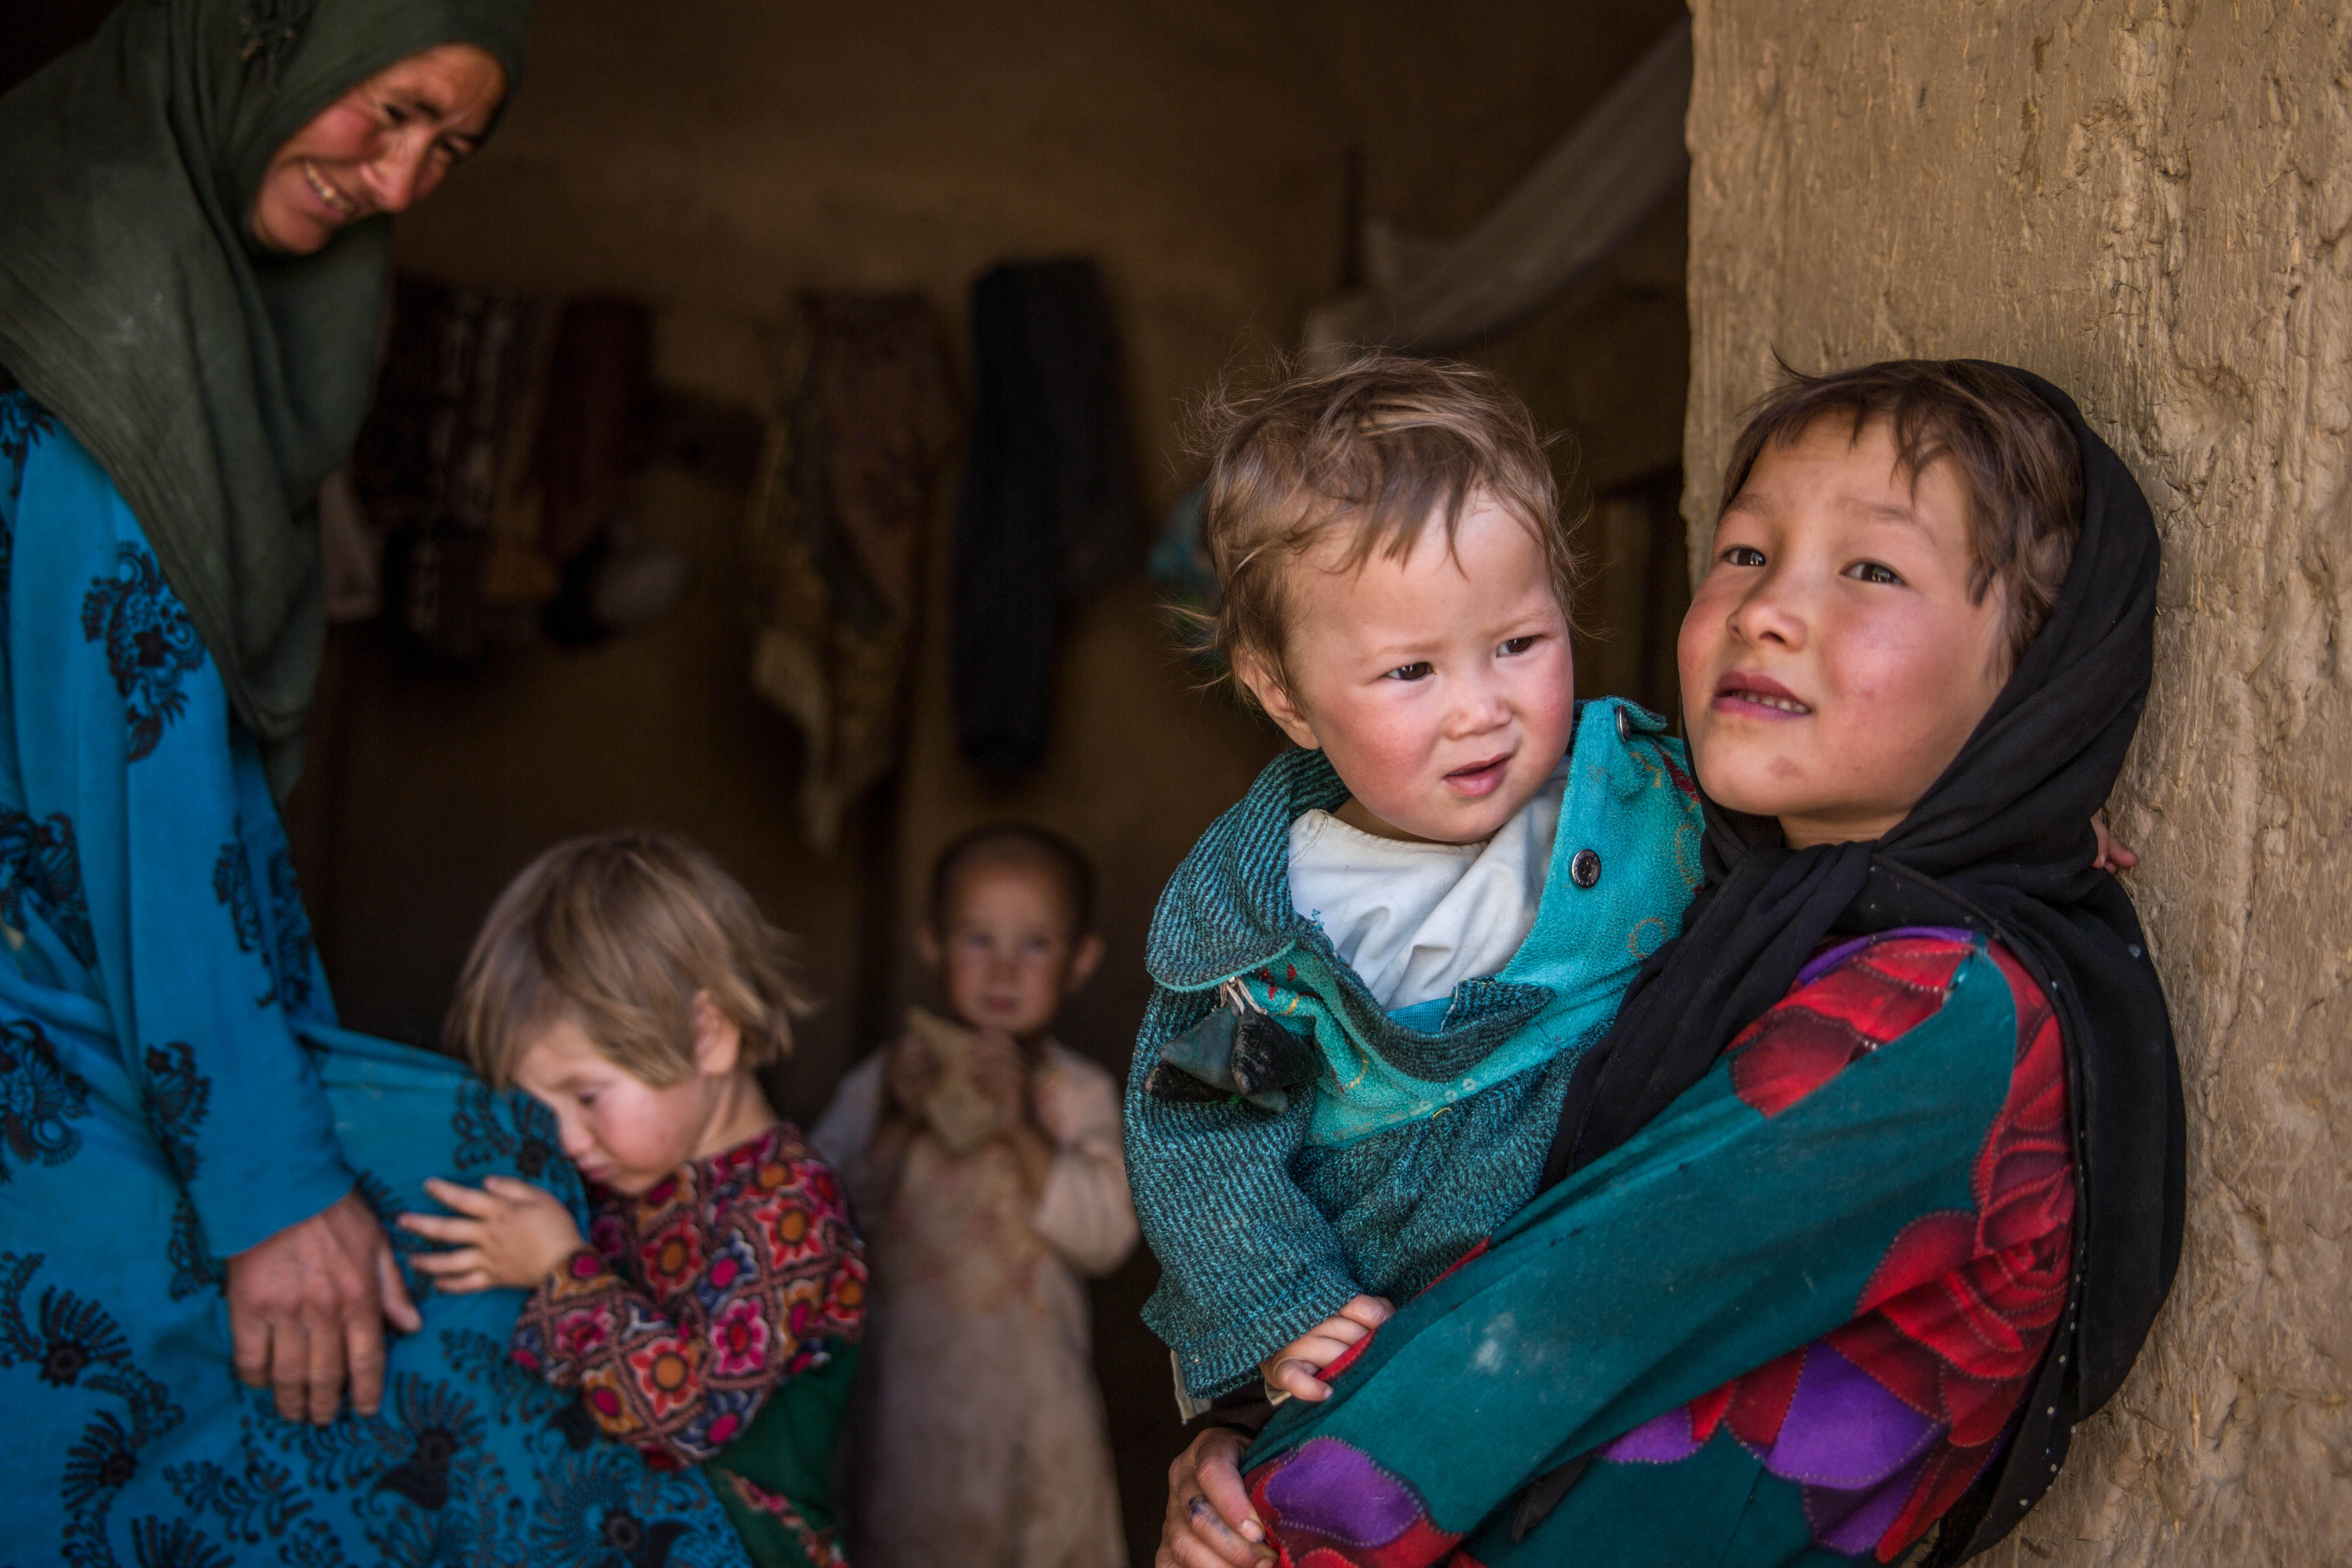 Young Afghan children stand in a doorway.